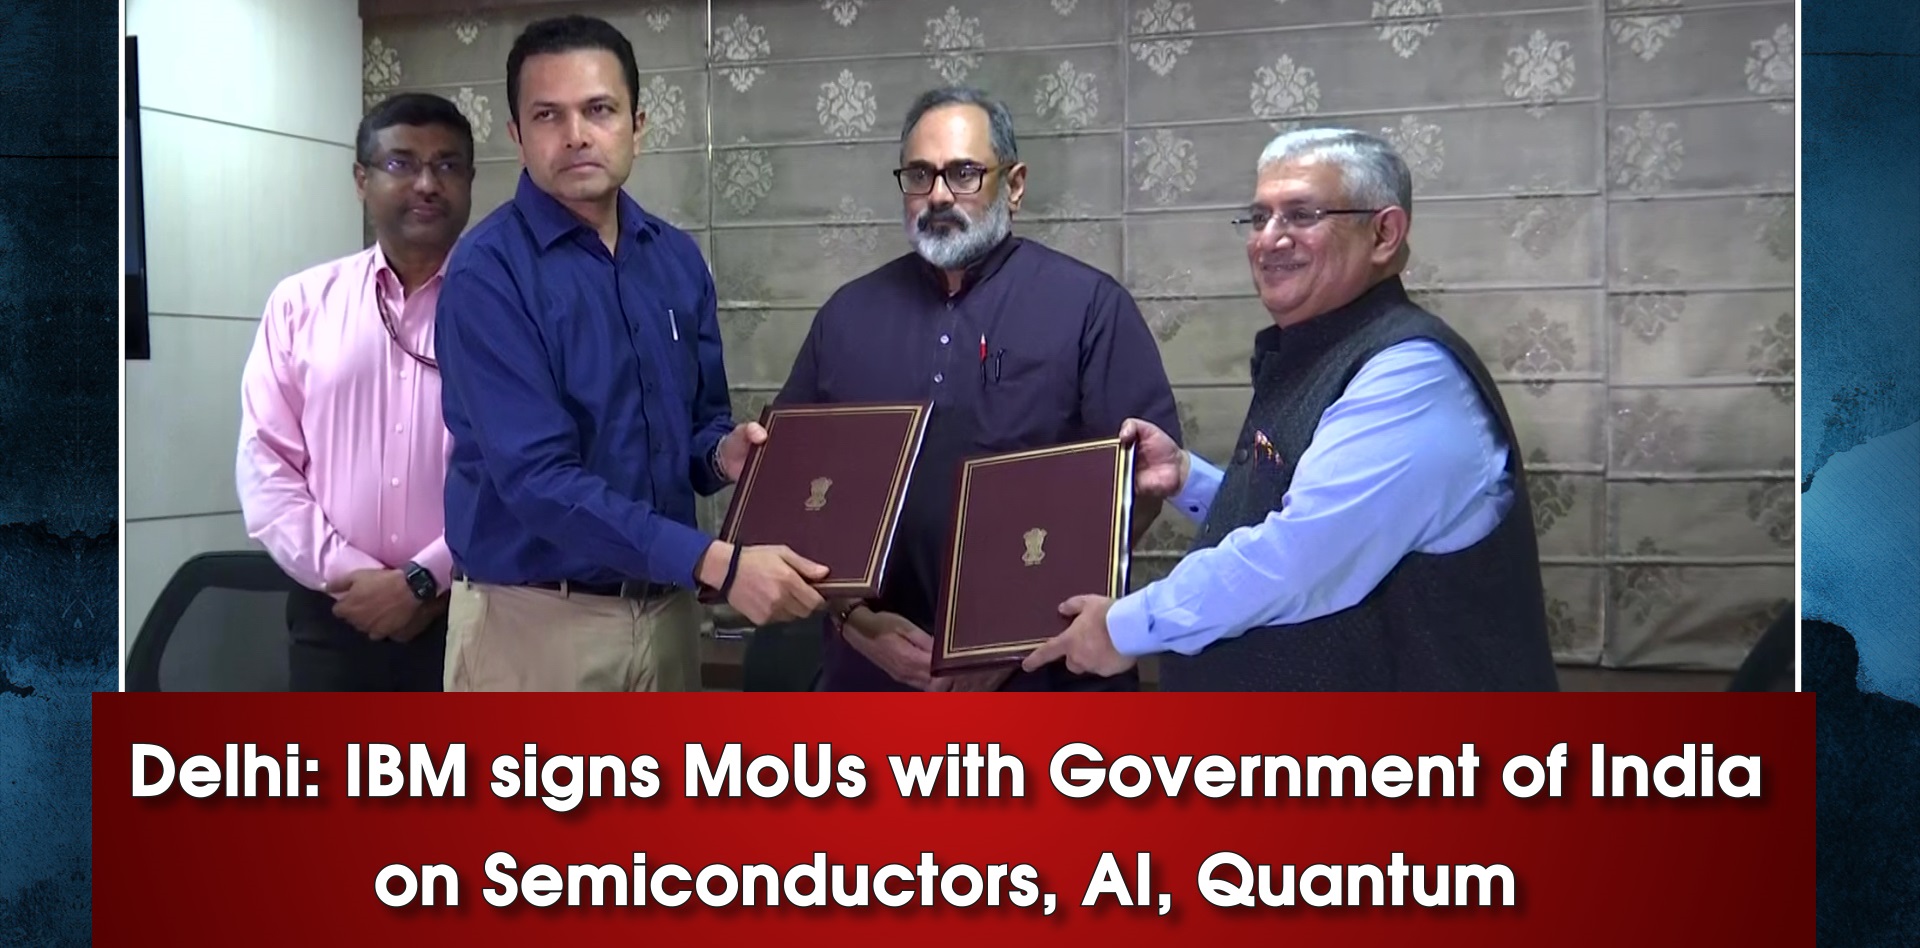 Delhi: IBM signs MoUs with Government of India on Semiconductors, AI, Quantum